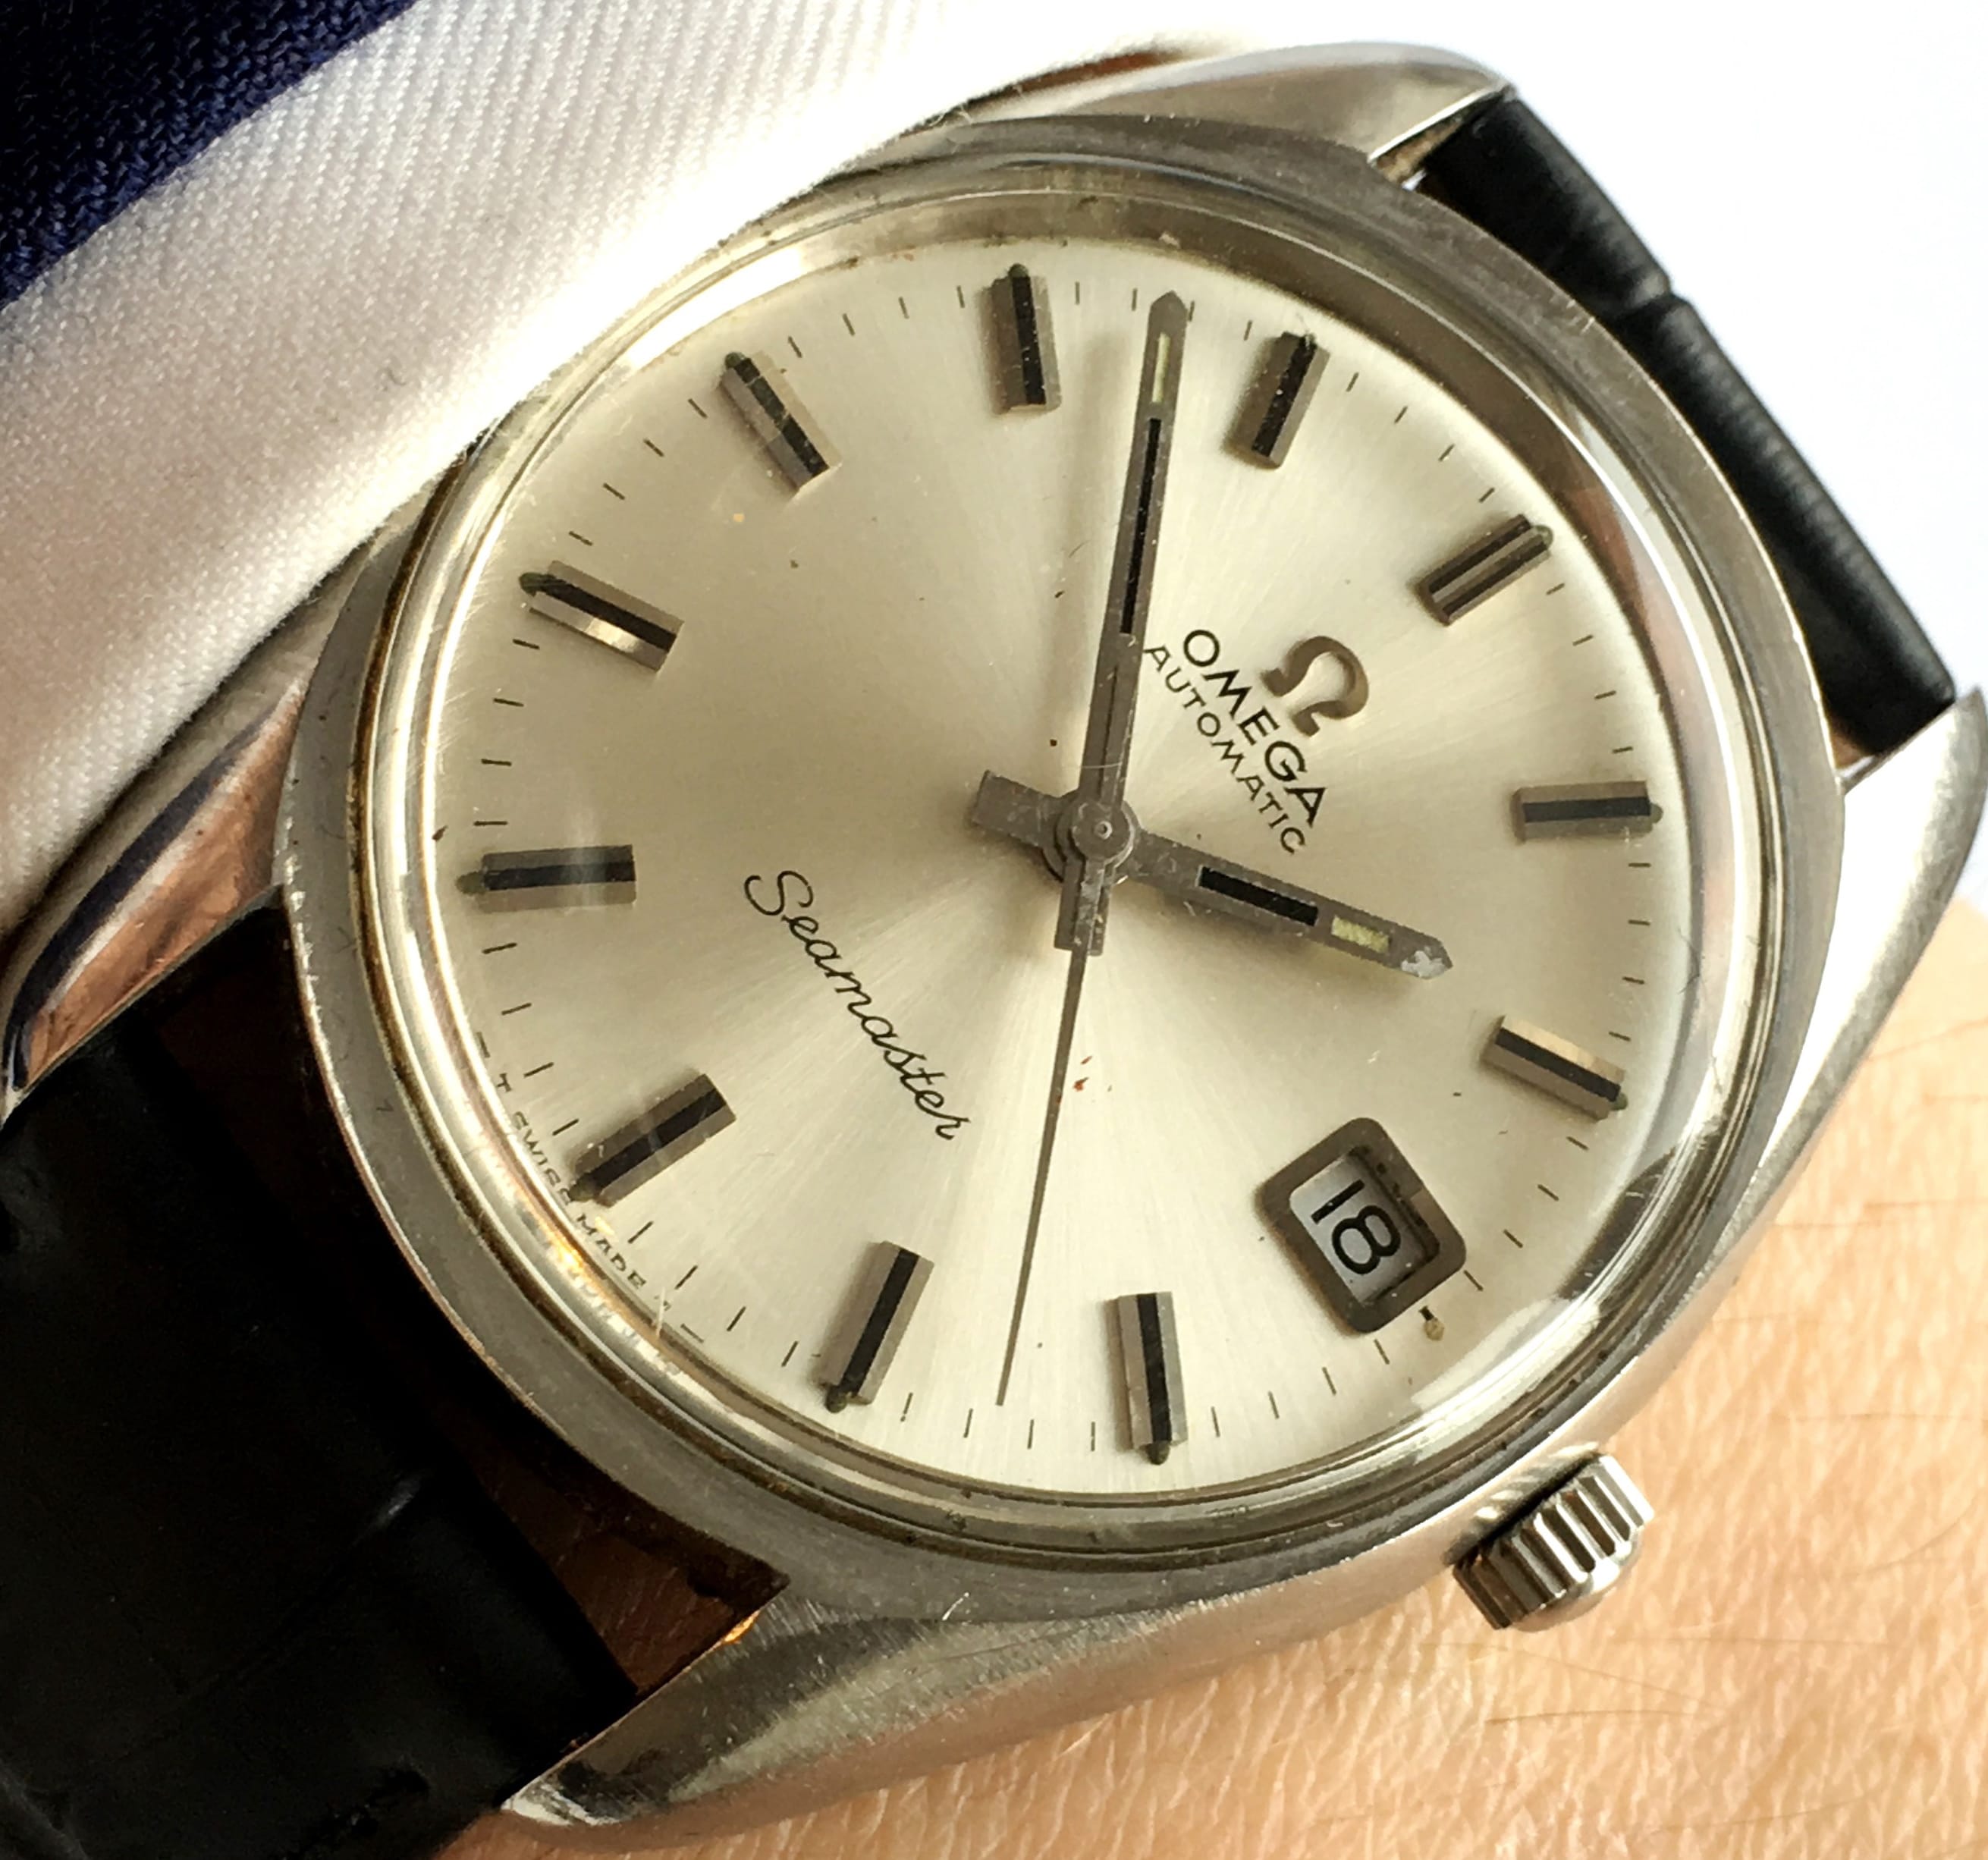 omega cal 565 review